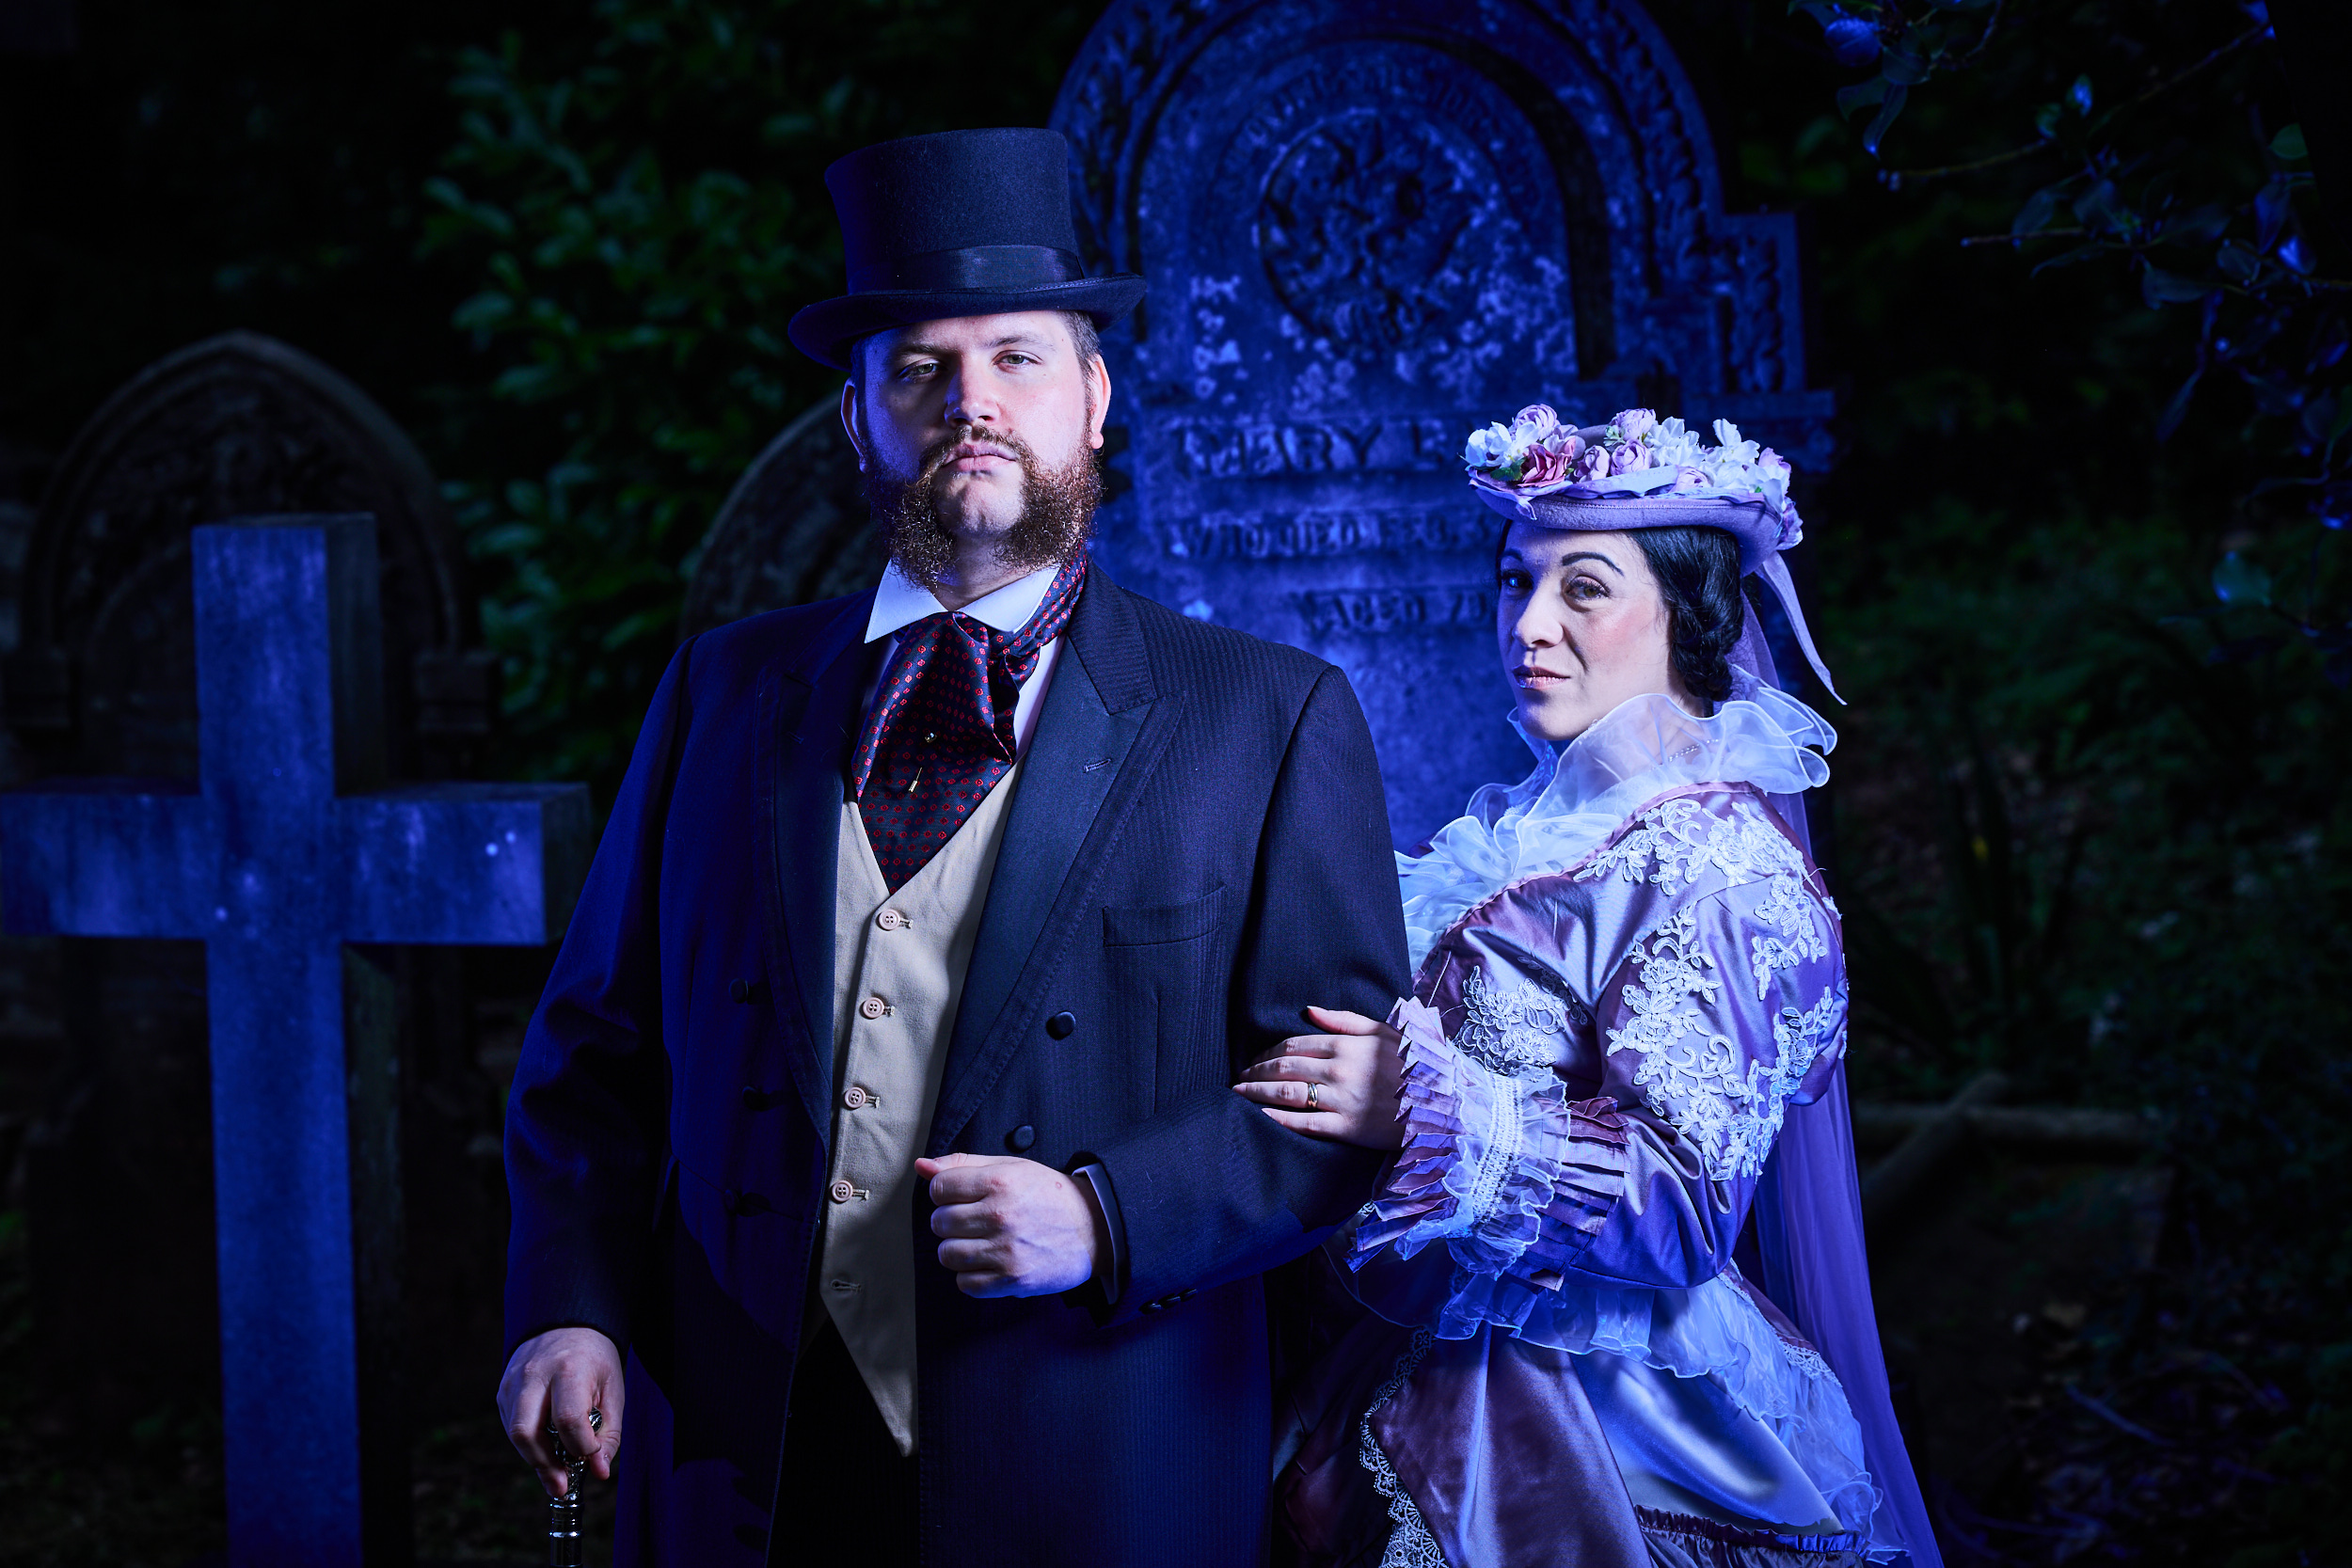 Victorian thriller performed at unusual Coventry location this Halloween